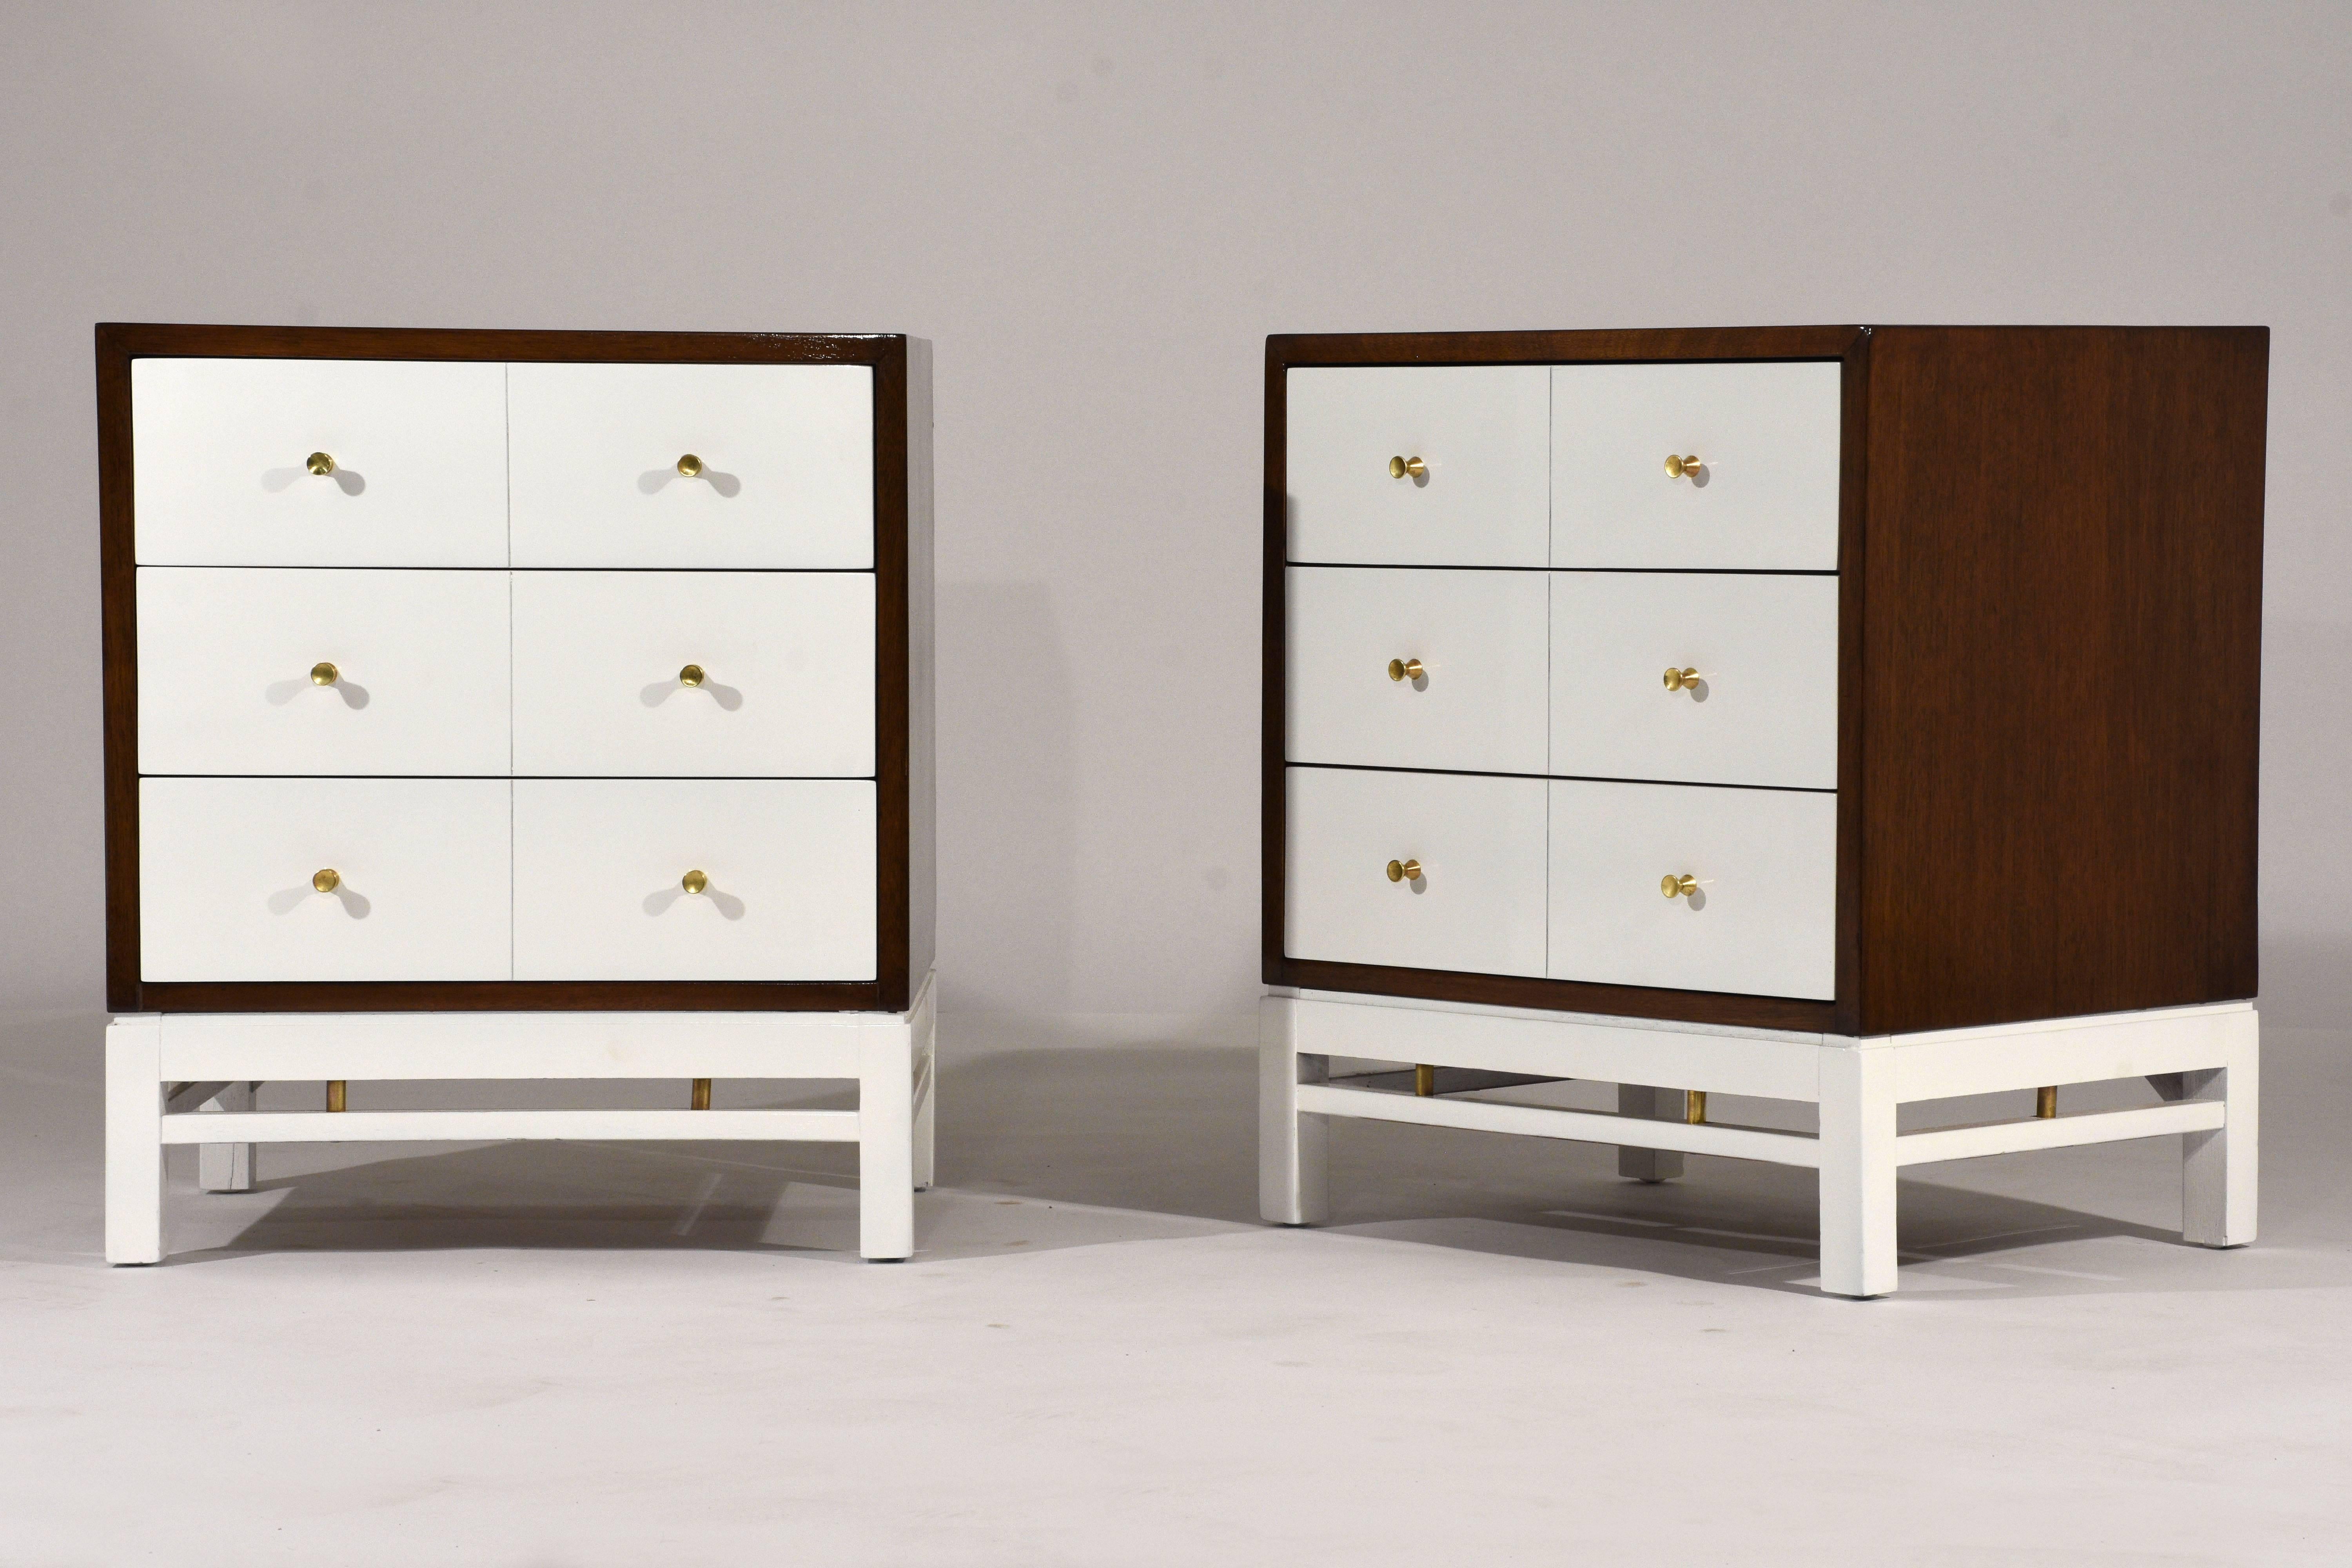 This pair of 1950s Mid-Century Modern style side tables or nightstands are designed by Paul McCobb. The outside of the night stands are finished in a rich walnut color stain and the facade of the drawers and the base are finished in an off-white